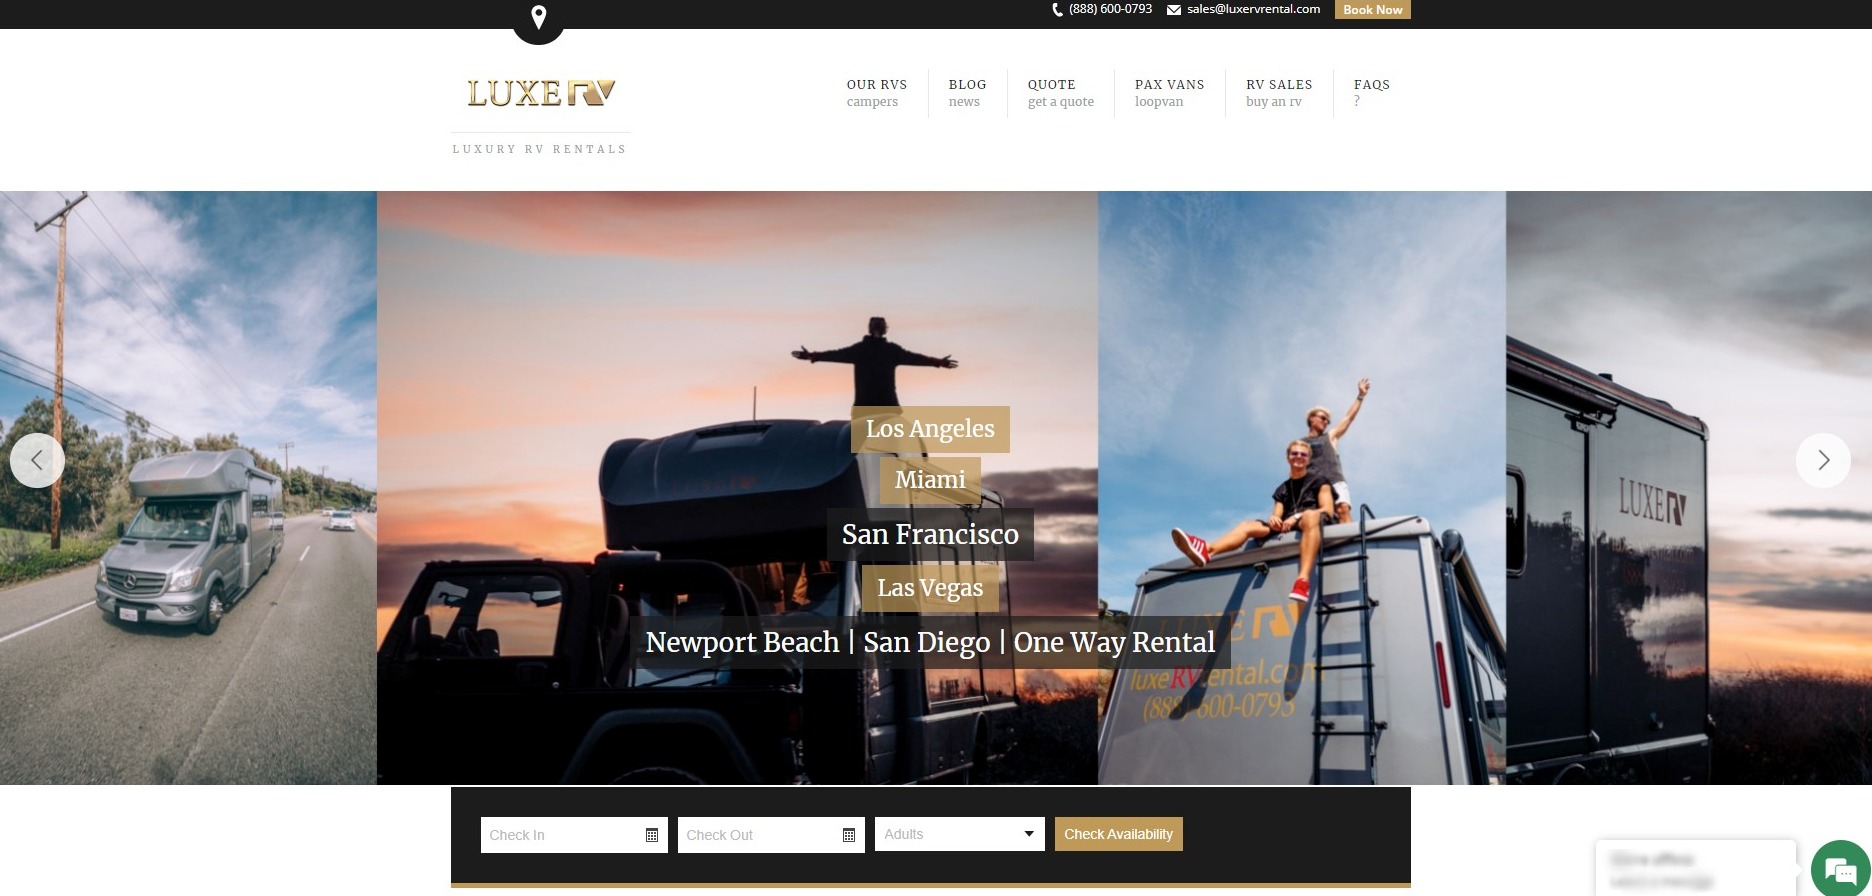 Luxe RV homepage with a collage of luxury rv's